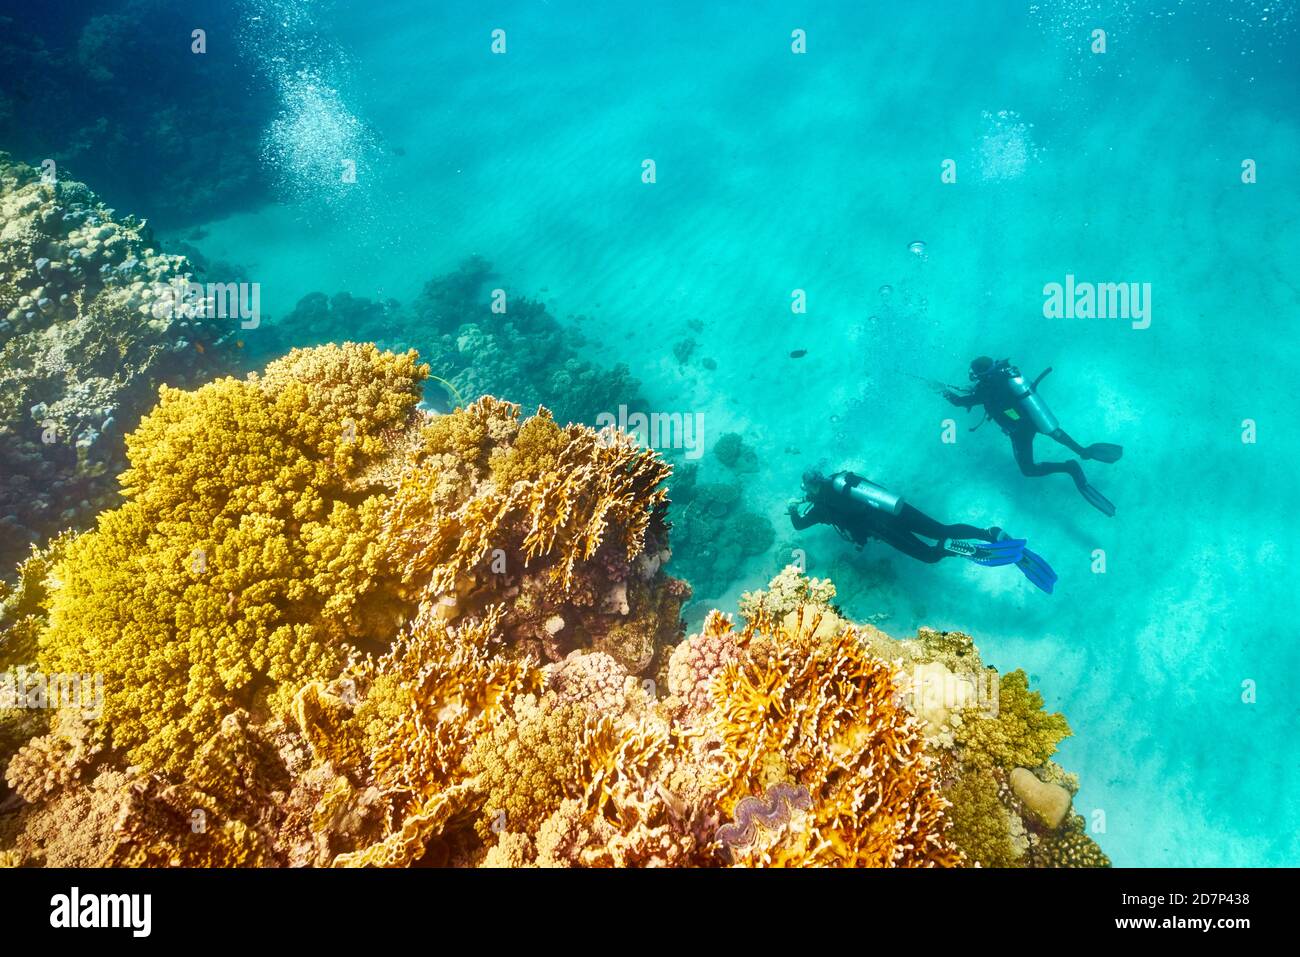 Underwater view at scuba divers and the reef, Marsa Alam, Red Sea, Egypt Stock Photo